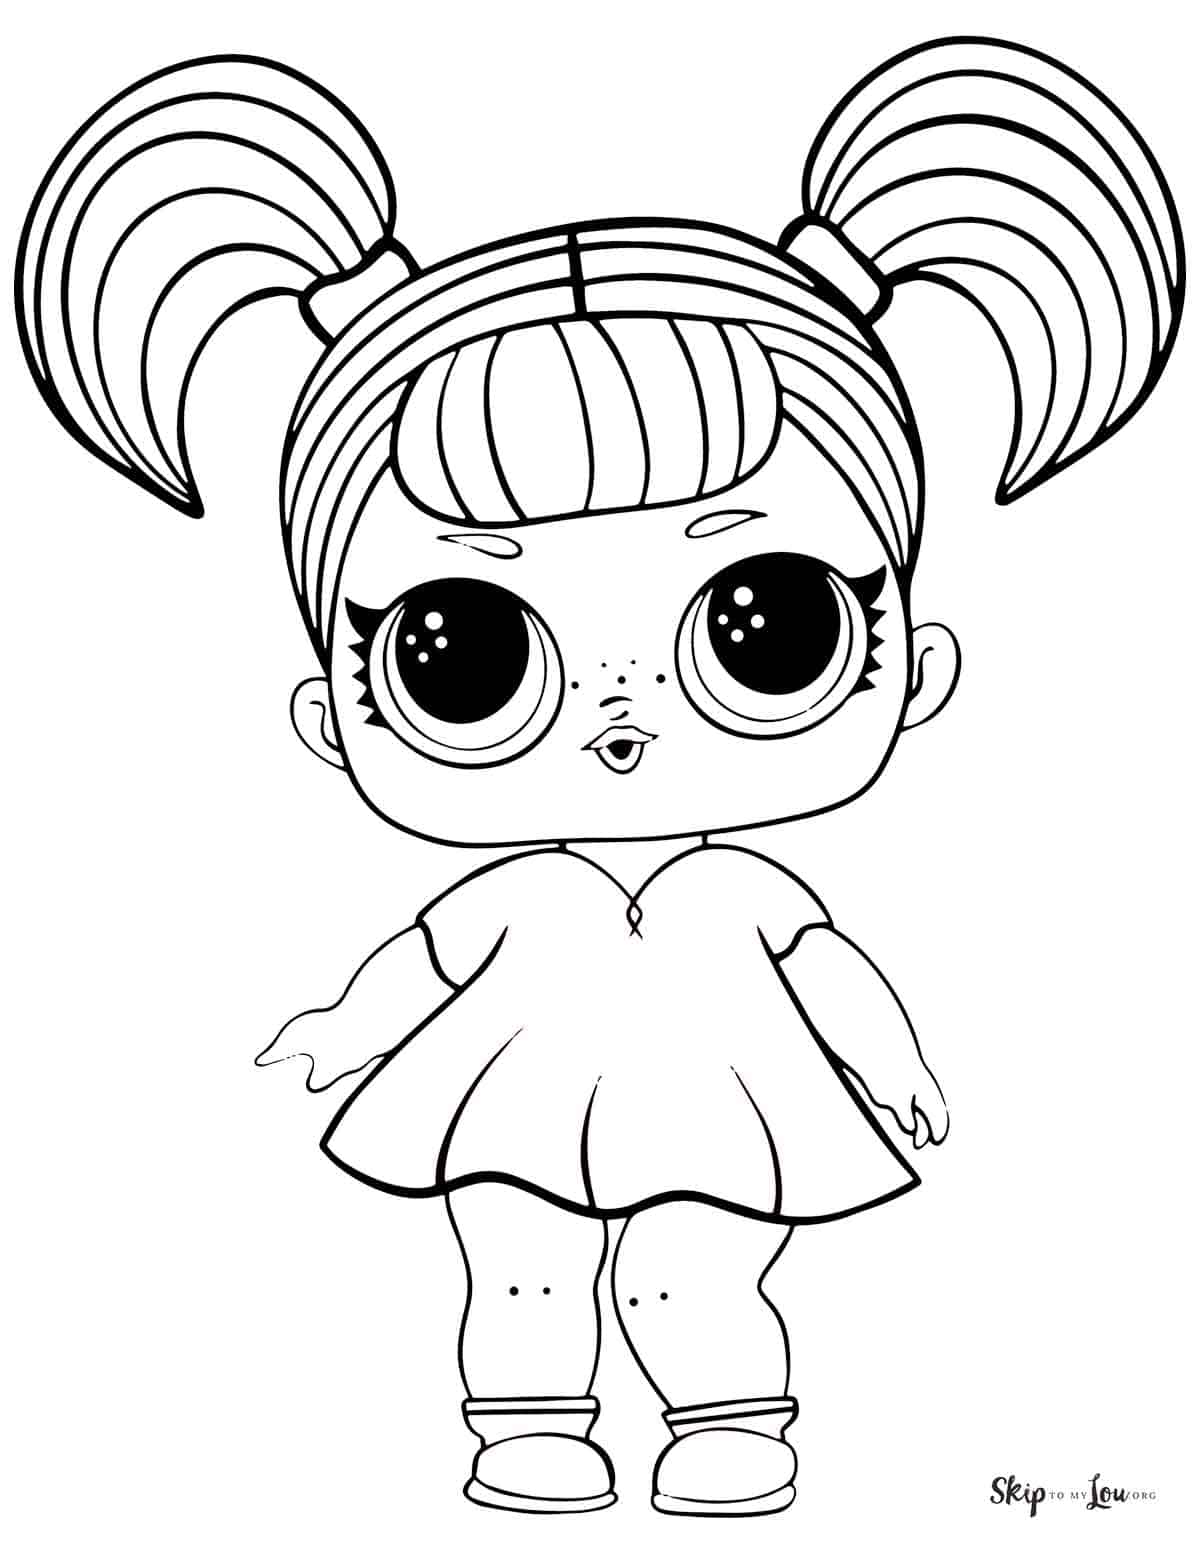 LOL Coloring Pages FREE Printable 28